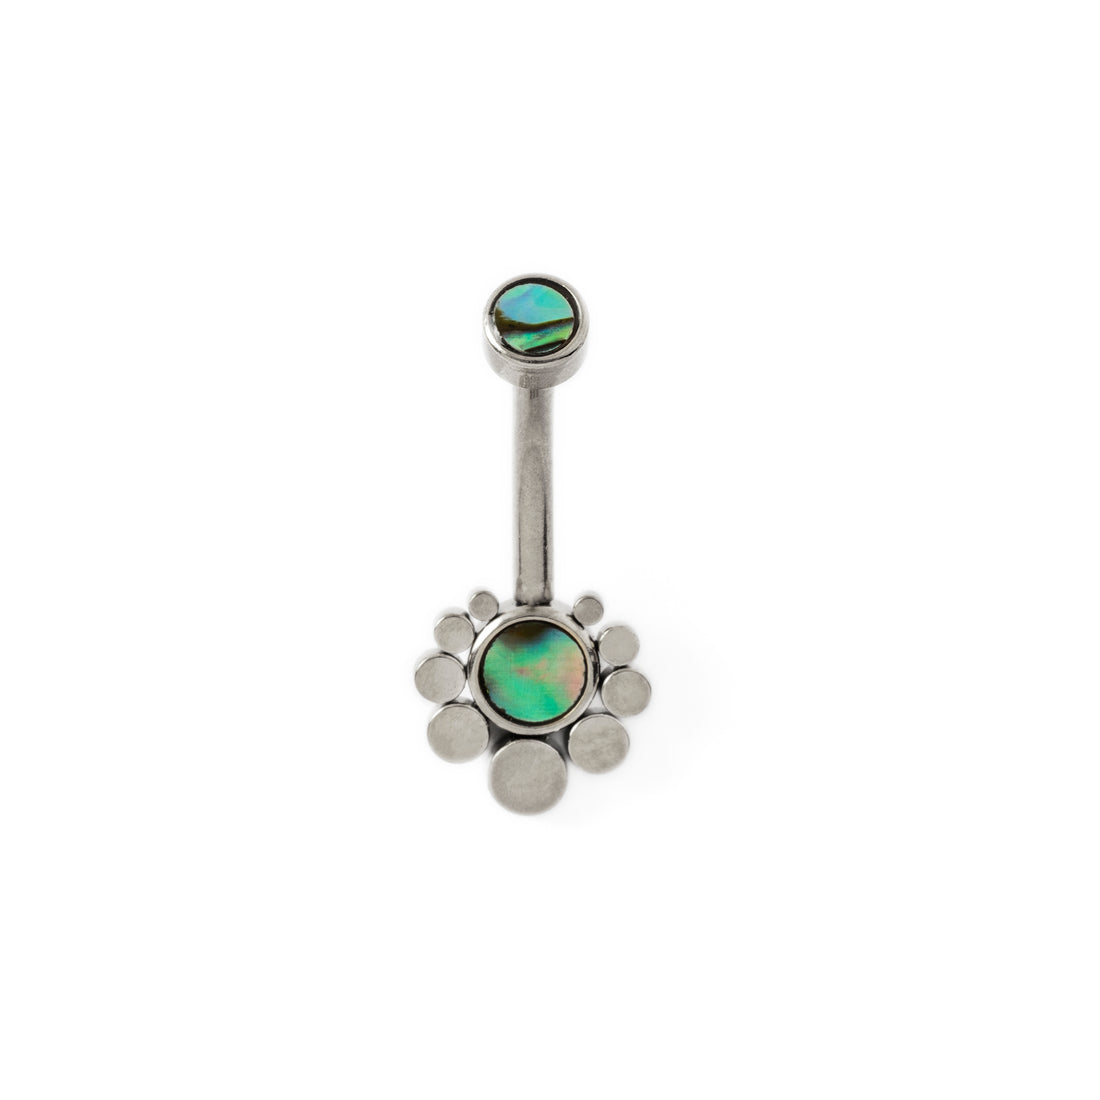 Orbit Belly Piercing with Abalone frontal view